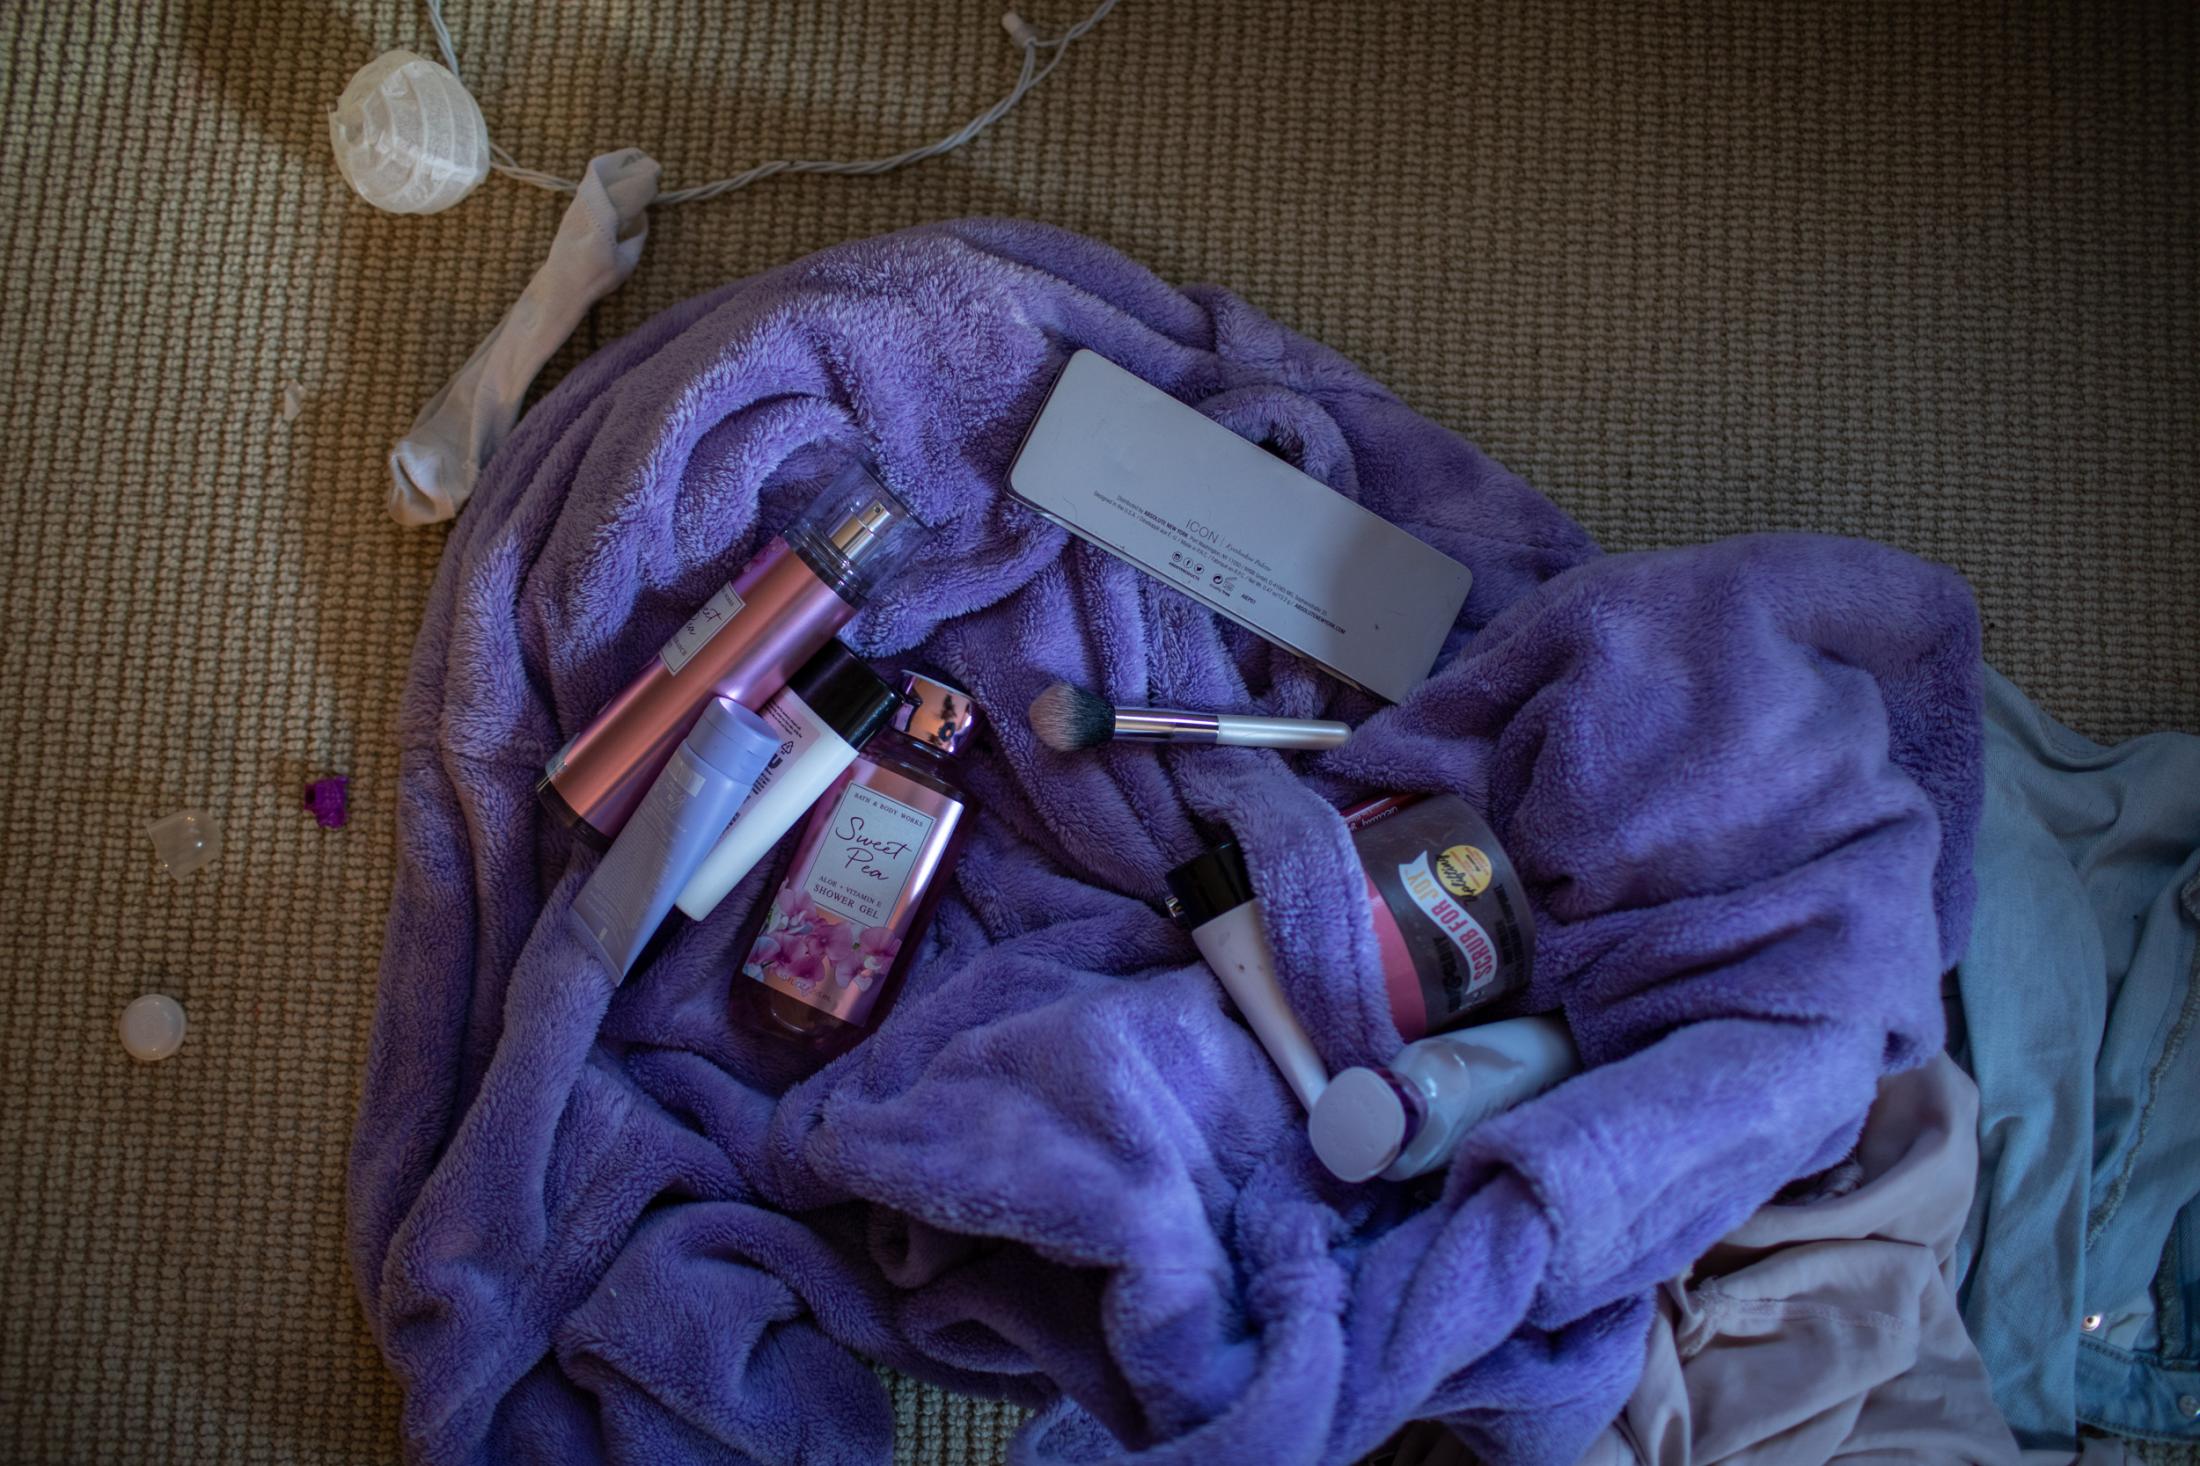 Jaylan Cosmetic products lay on the carpet, South Portland, Maine, September, 2021.